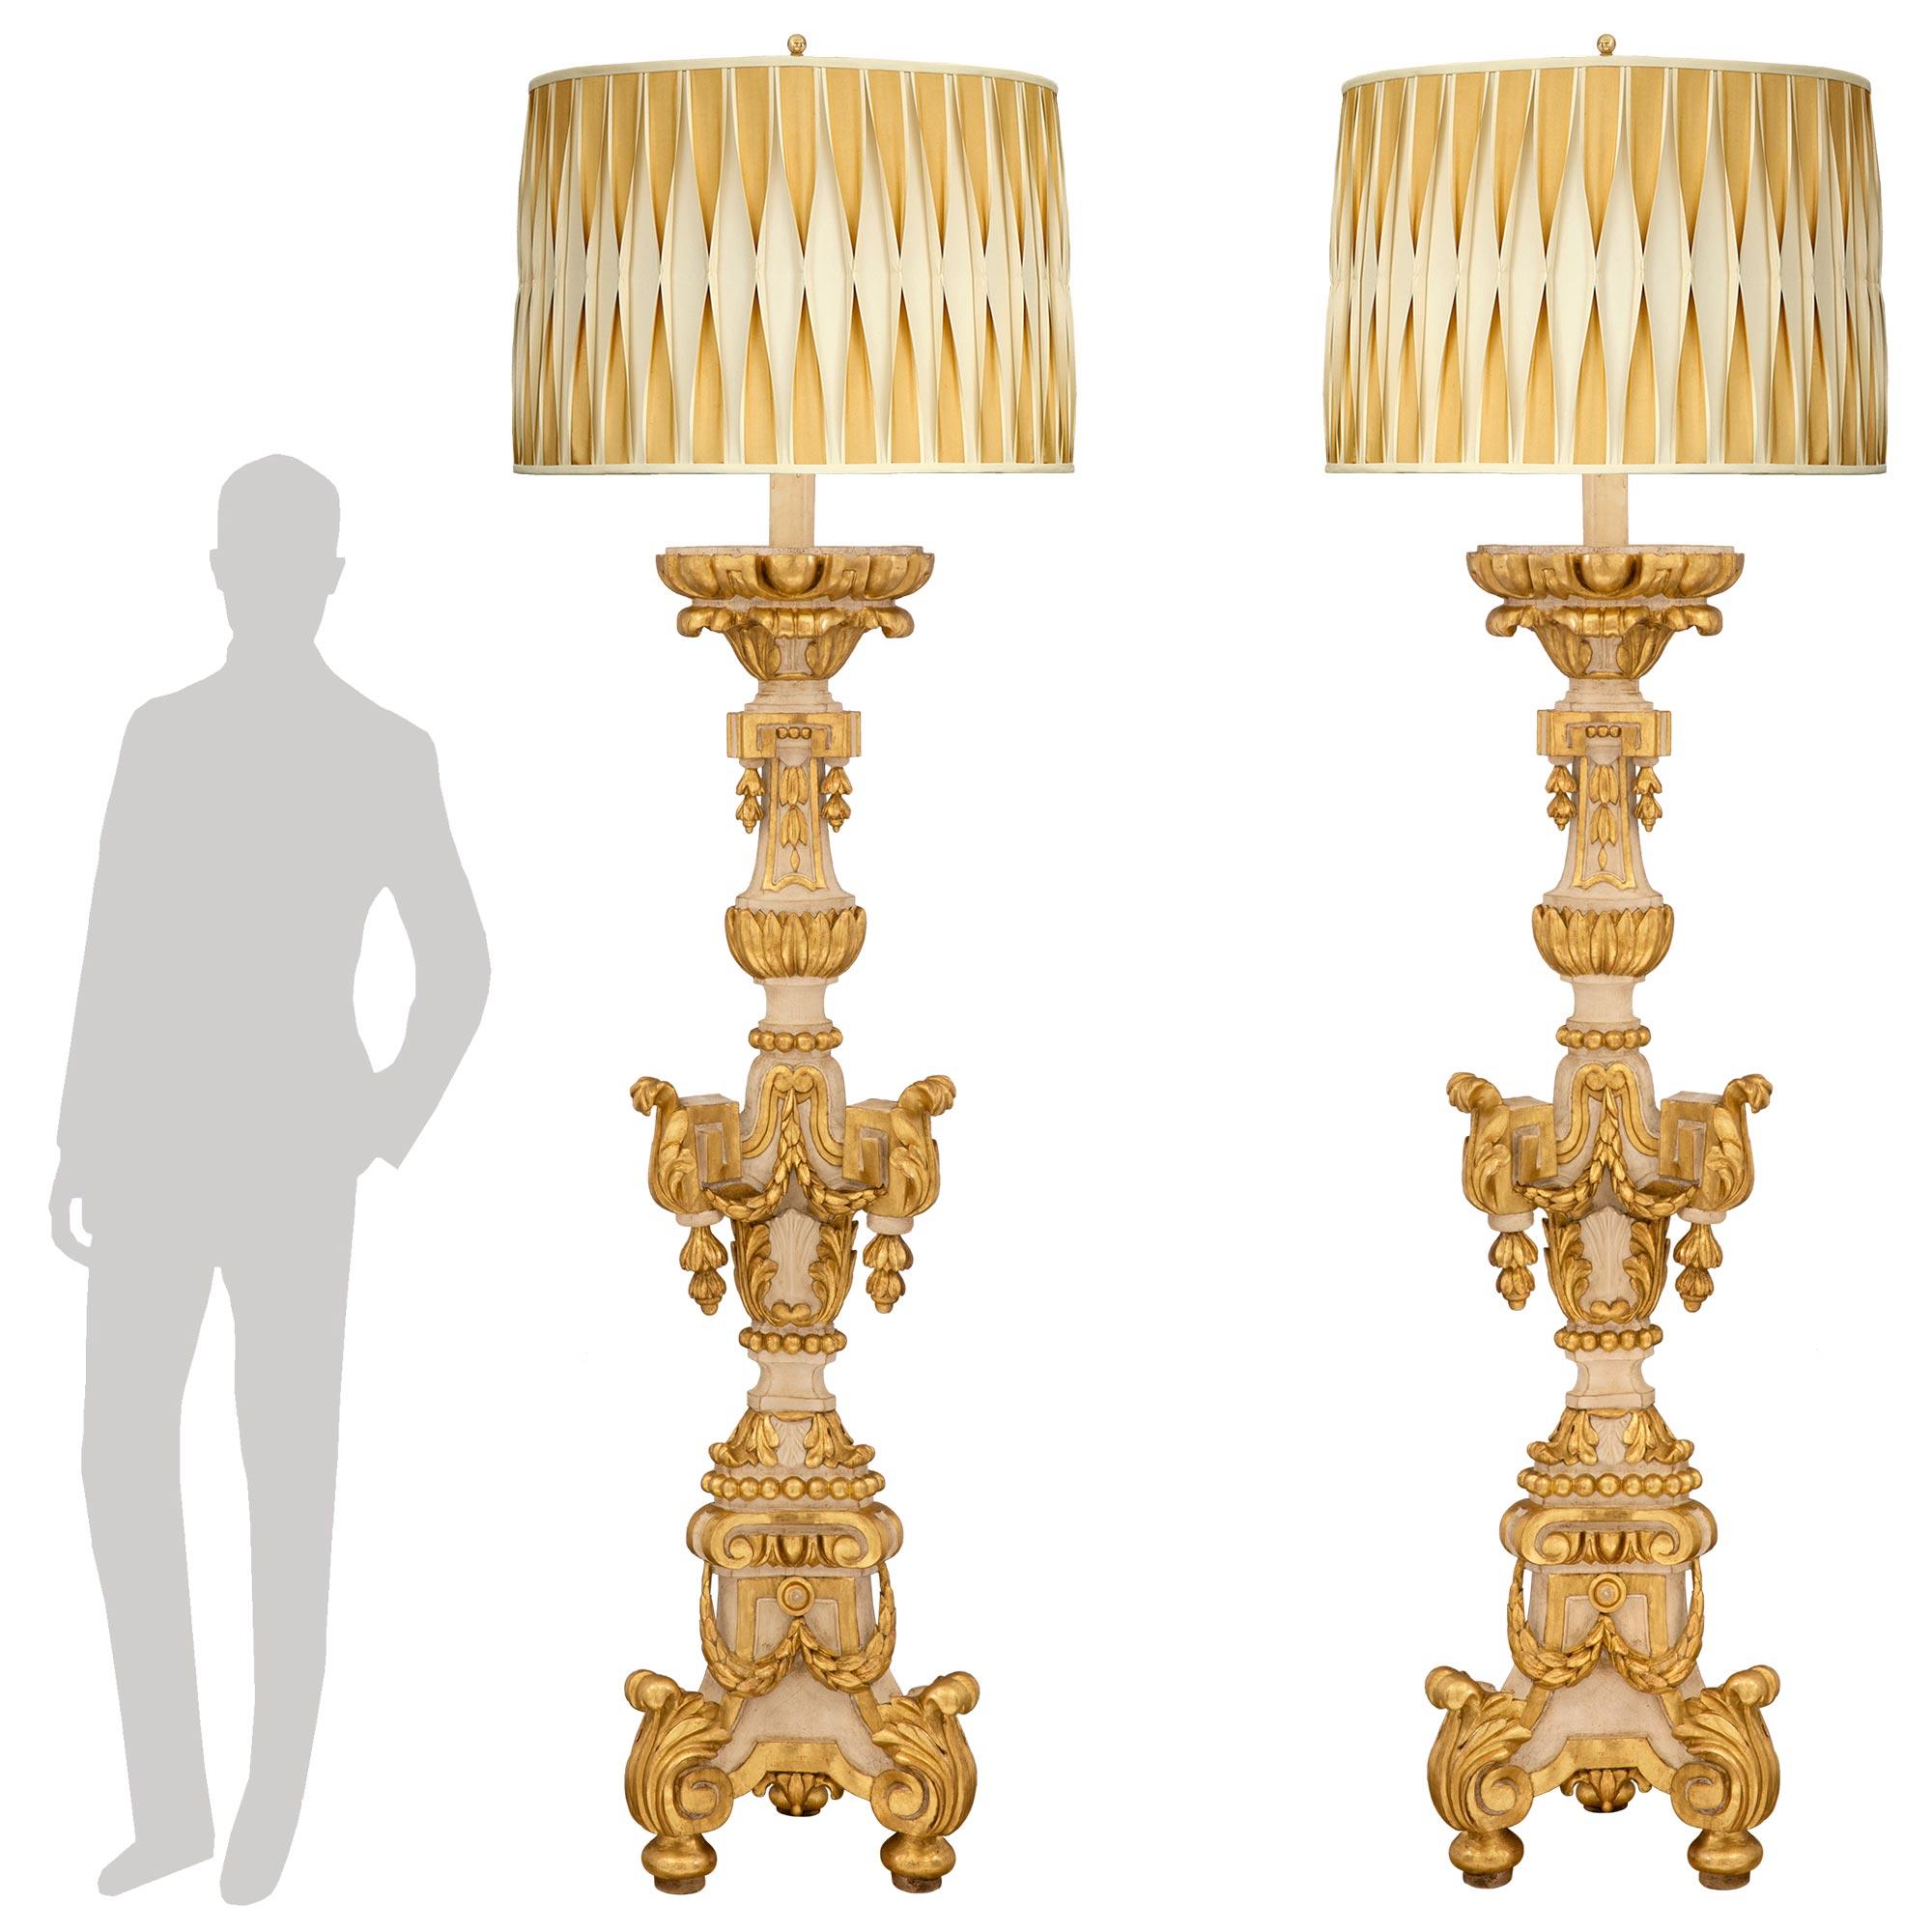 A magnificent and very large scale pair of Italian 18th-century Baroque period patinated and giltwood floor lamps. Each statement-making torchière floor lamp is raised by elegant tope-shaped feet with large acanthus leaves at the triangular base